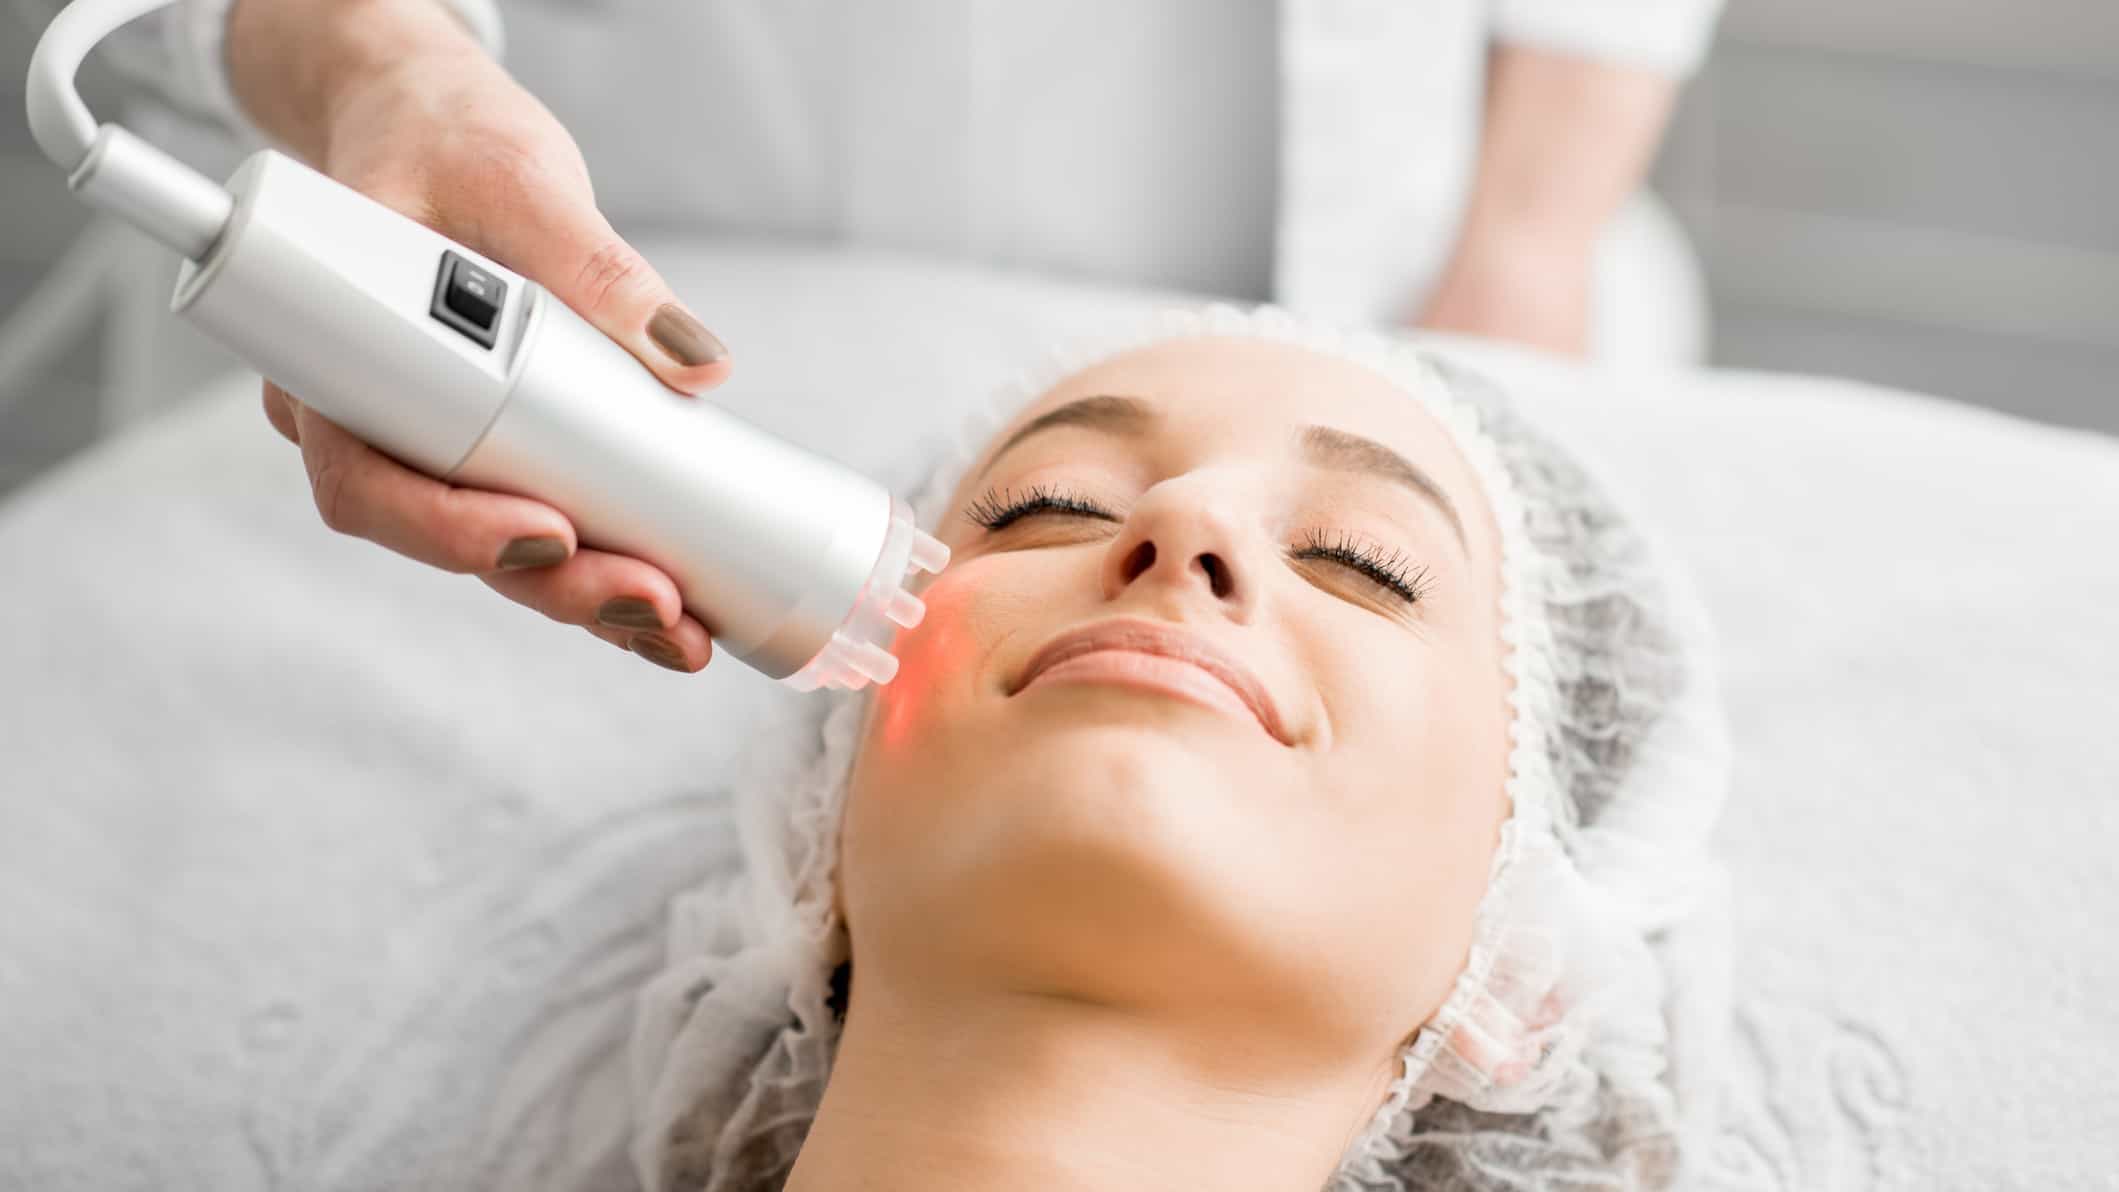 a woman lies on a medical bed for a cosmetic lasering session with a hand held laser directing light onto her cheek area.